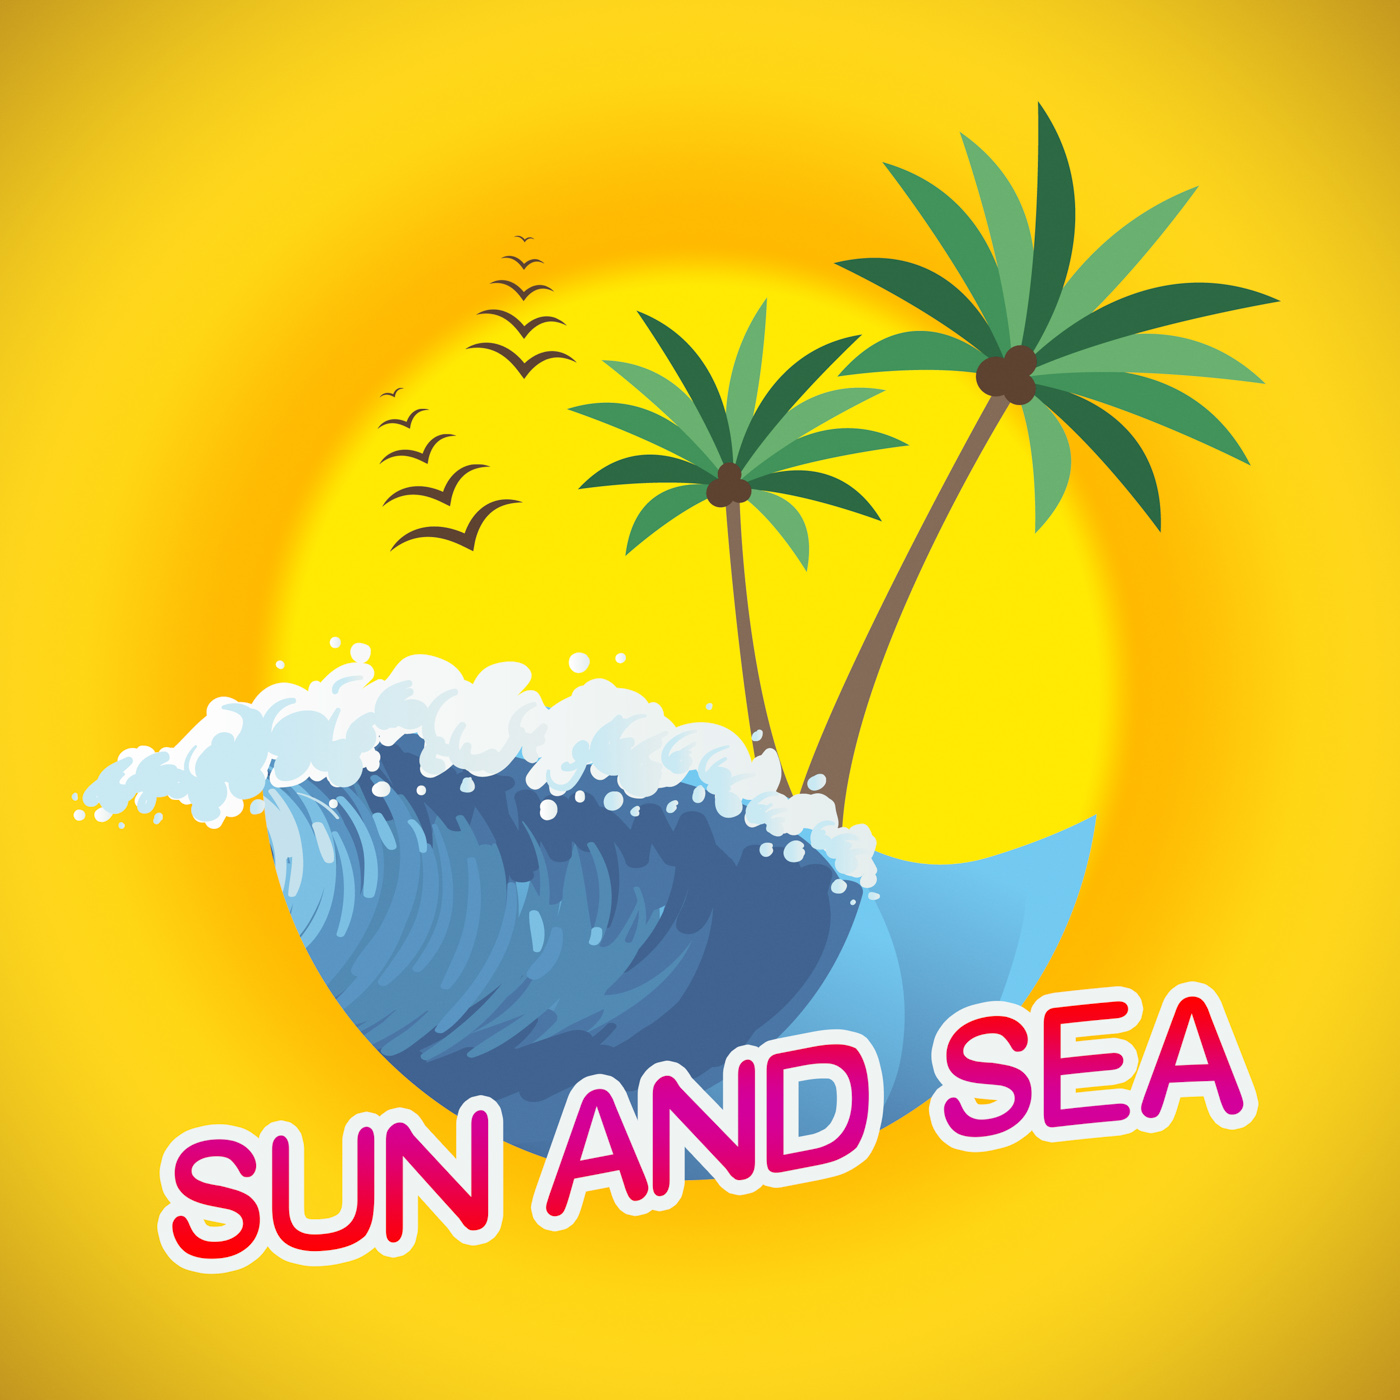 Sun and sea represents summer time and sunshine photo